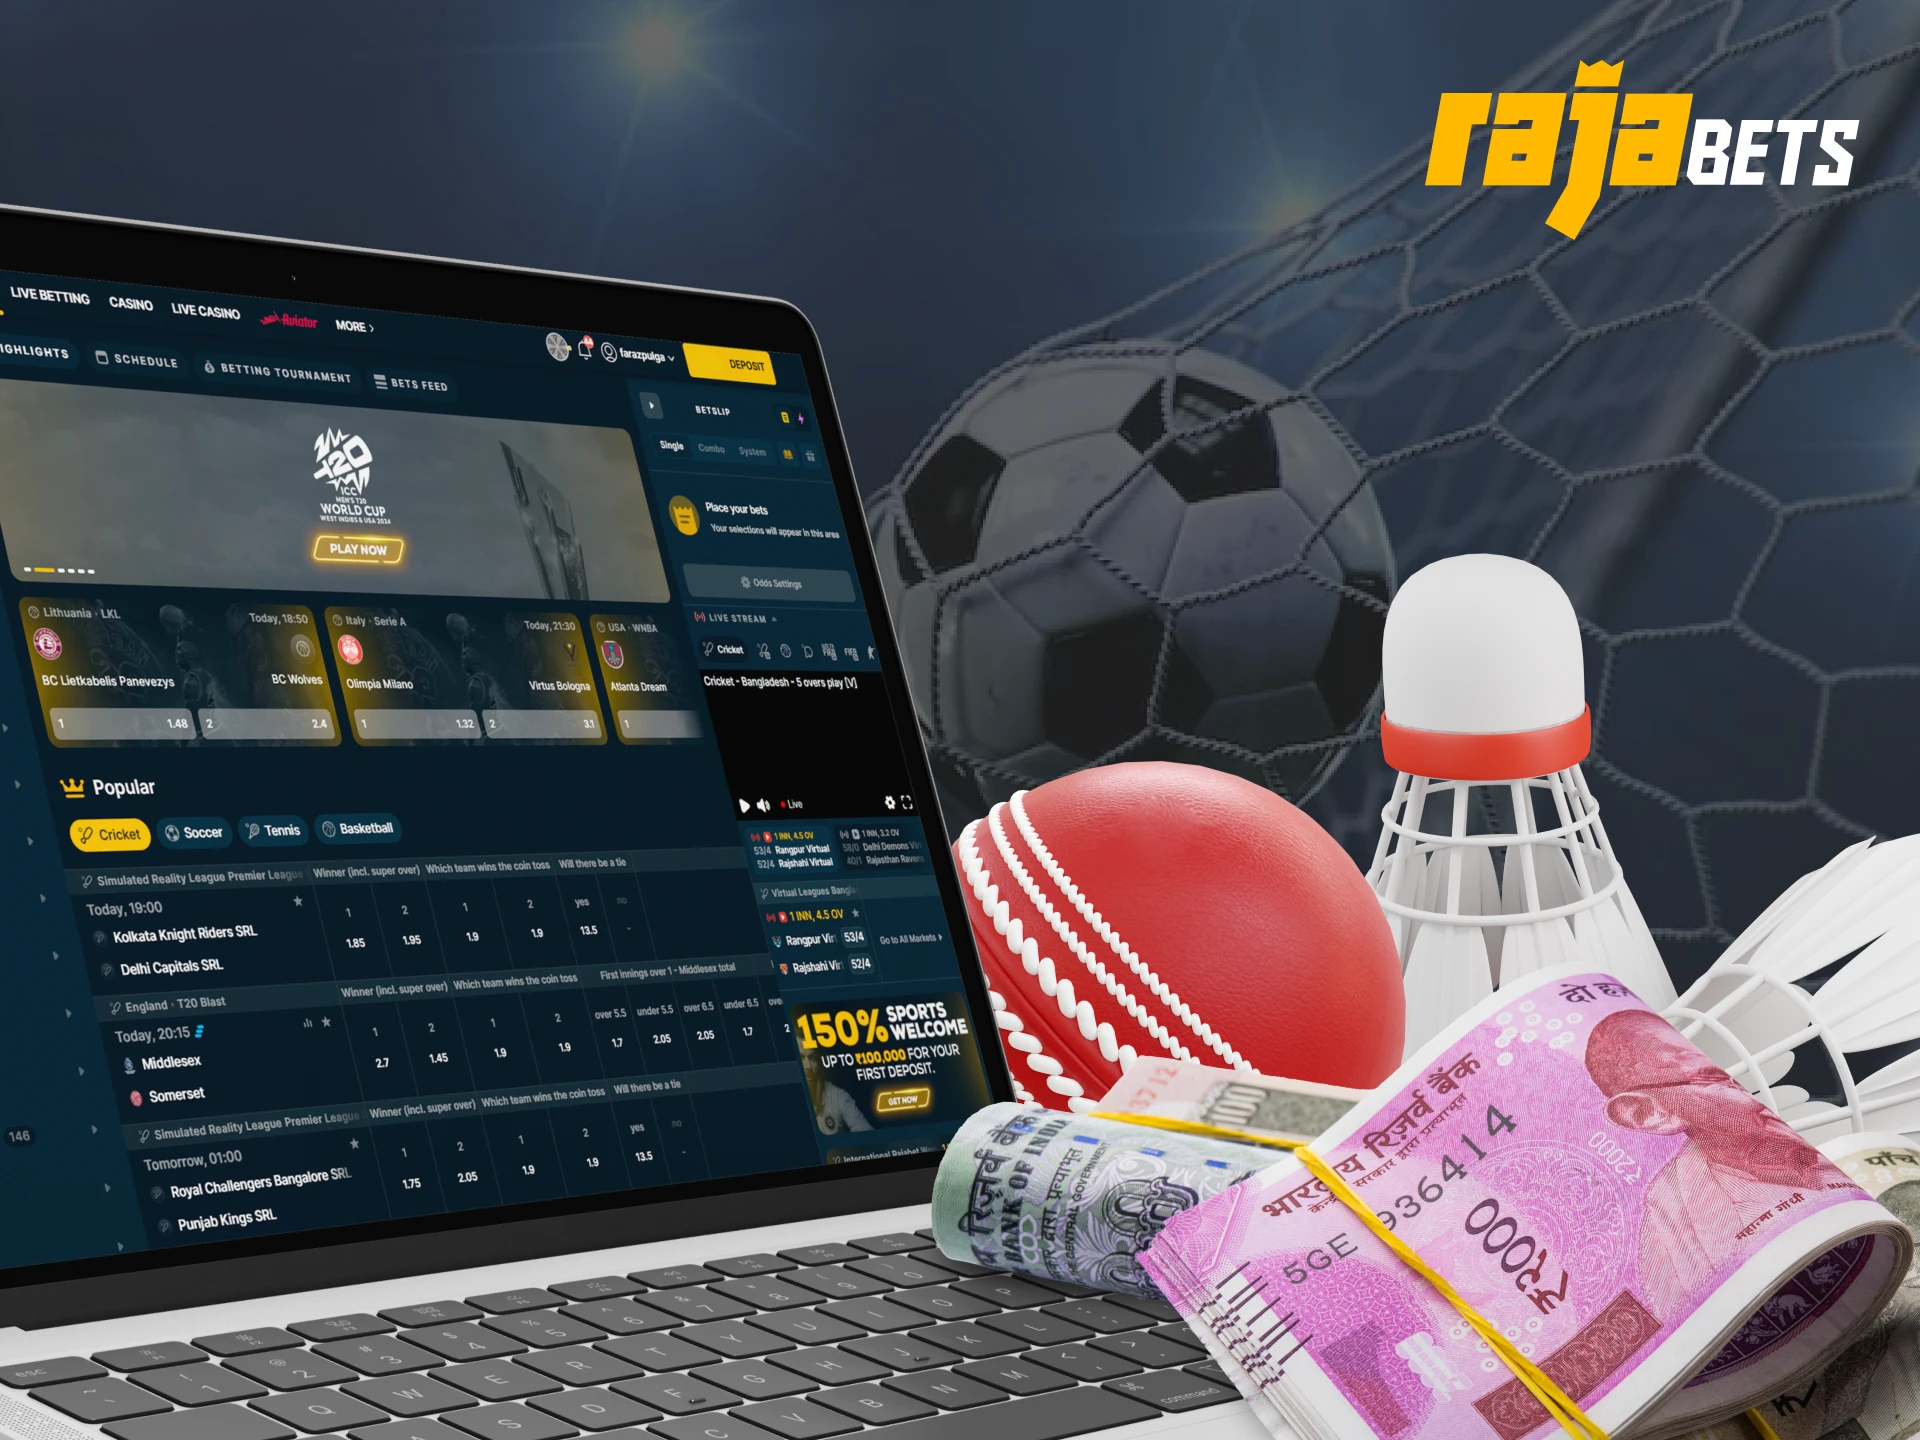 At Rajabets you can find many different sports disciplines to bet on.